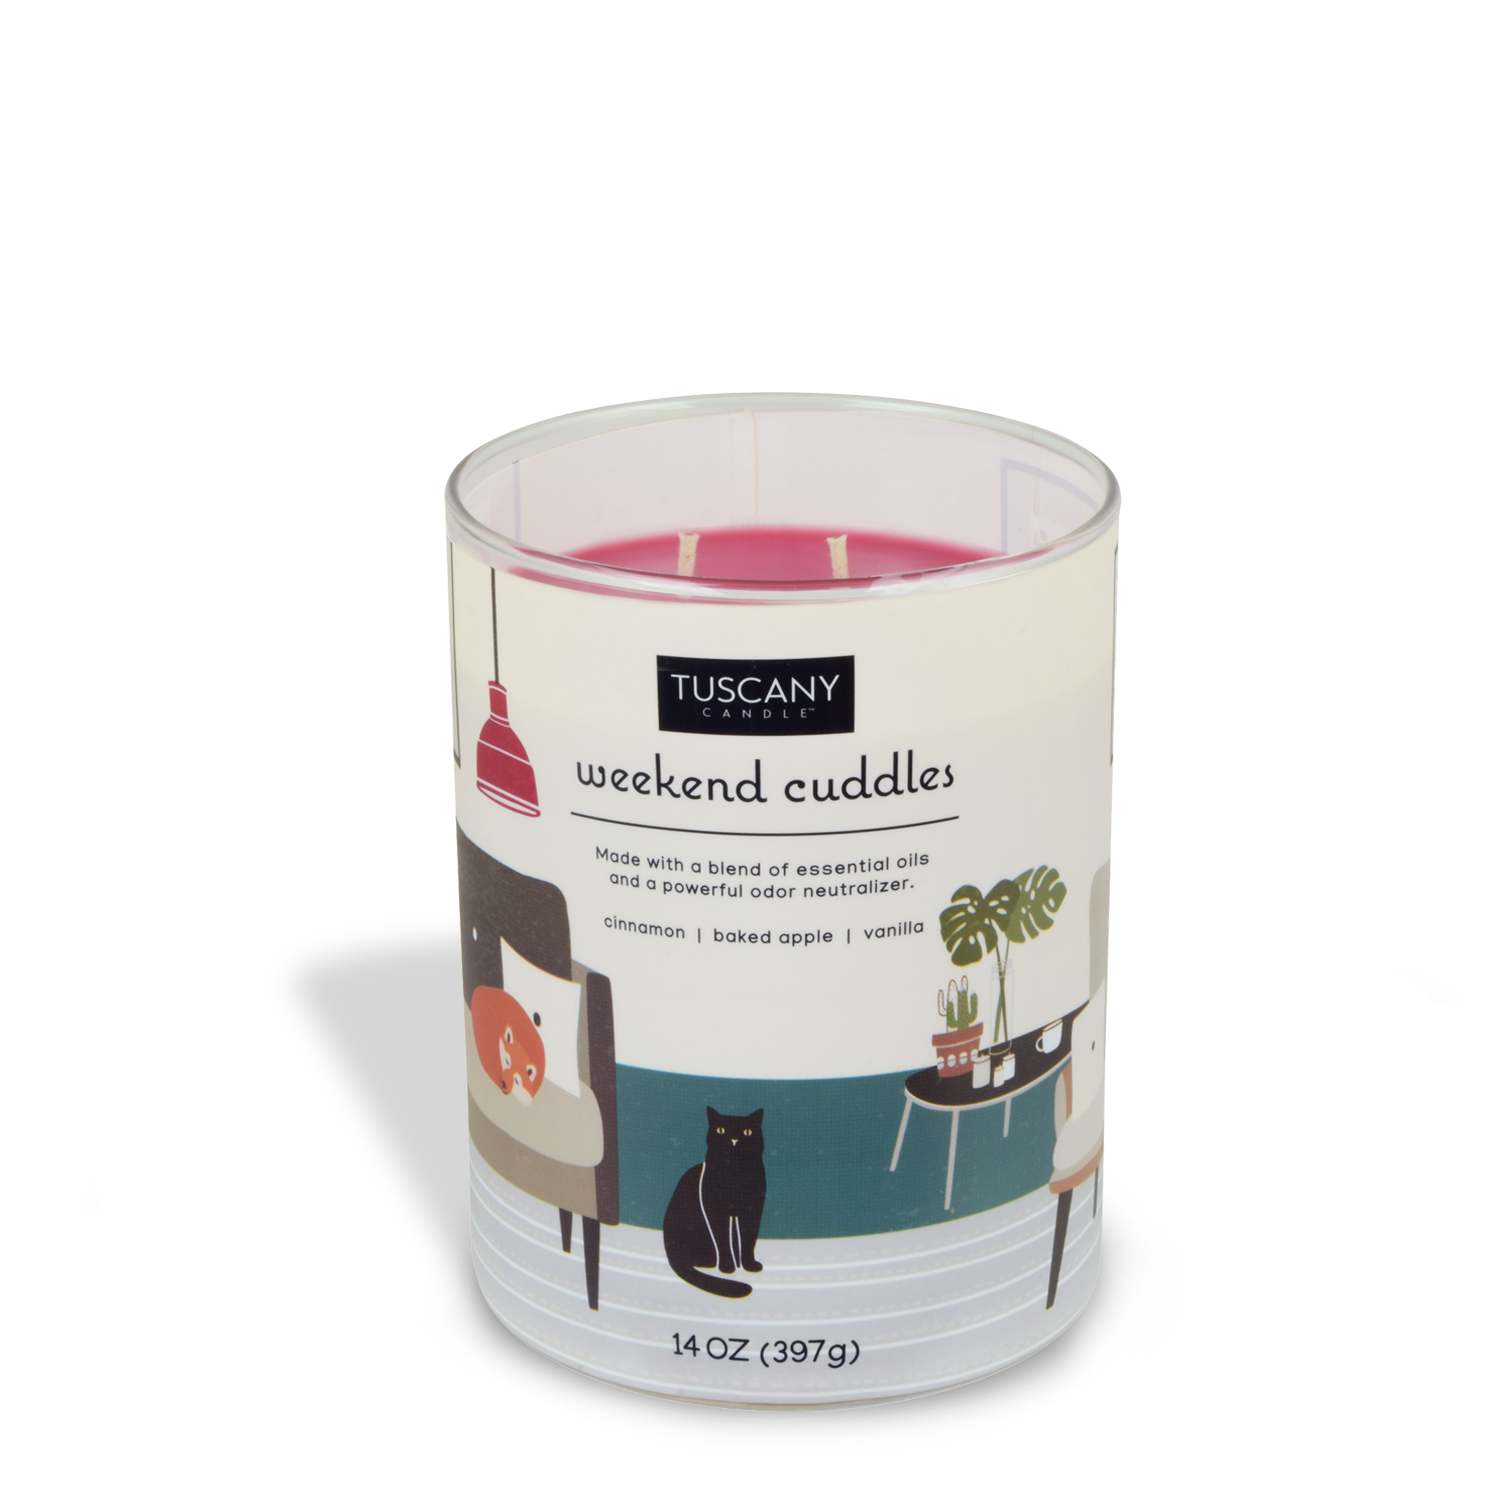 A Weekend Cuddles Scented Jar Candle (14 oz) – Pet Odor Control Collection by Tuscany Candle, with an image of a cat on a couch, designed to neutralize pet odors.